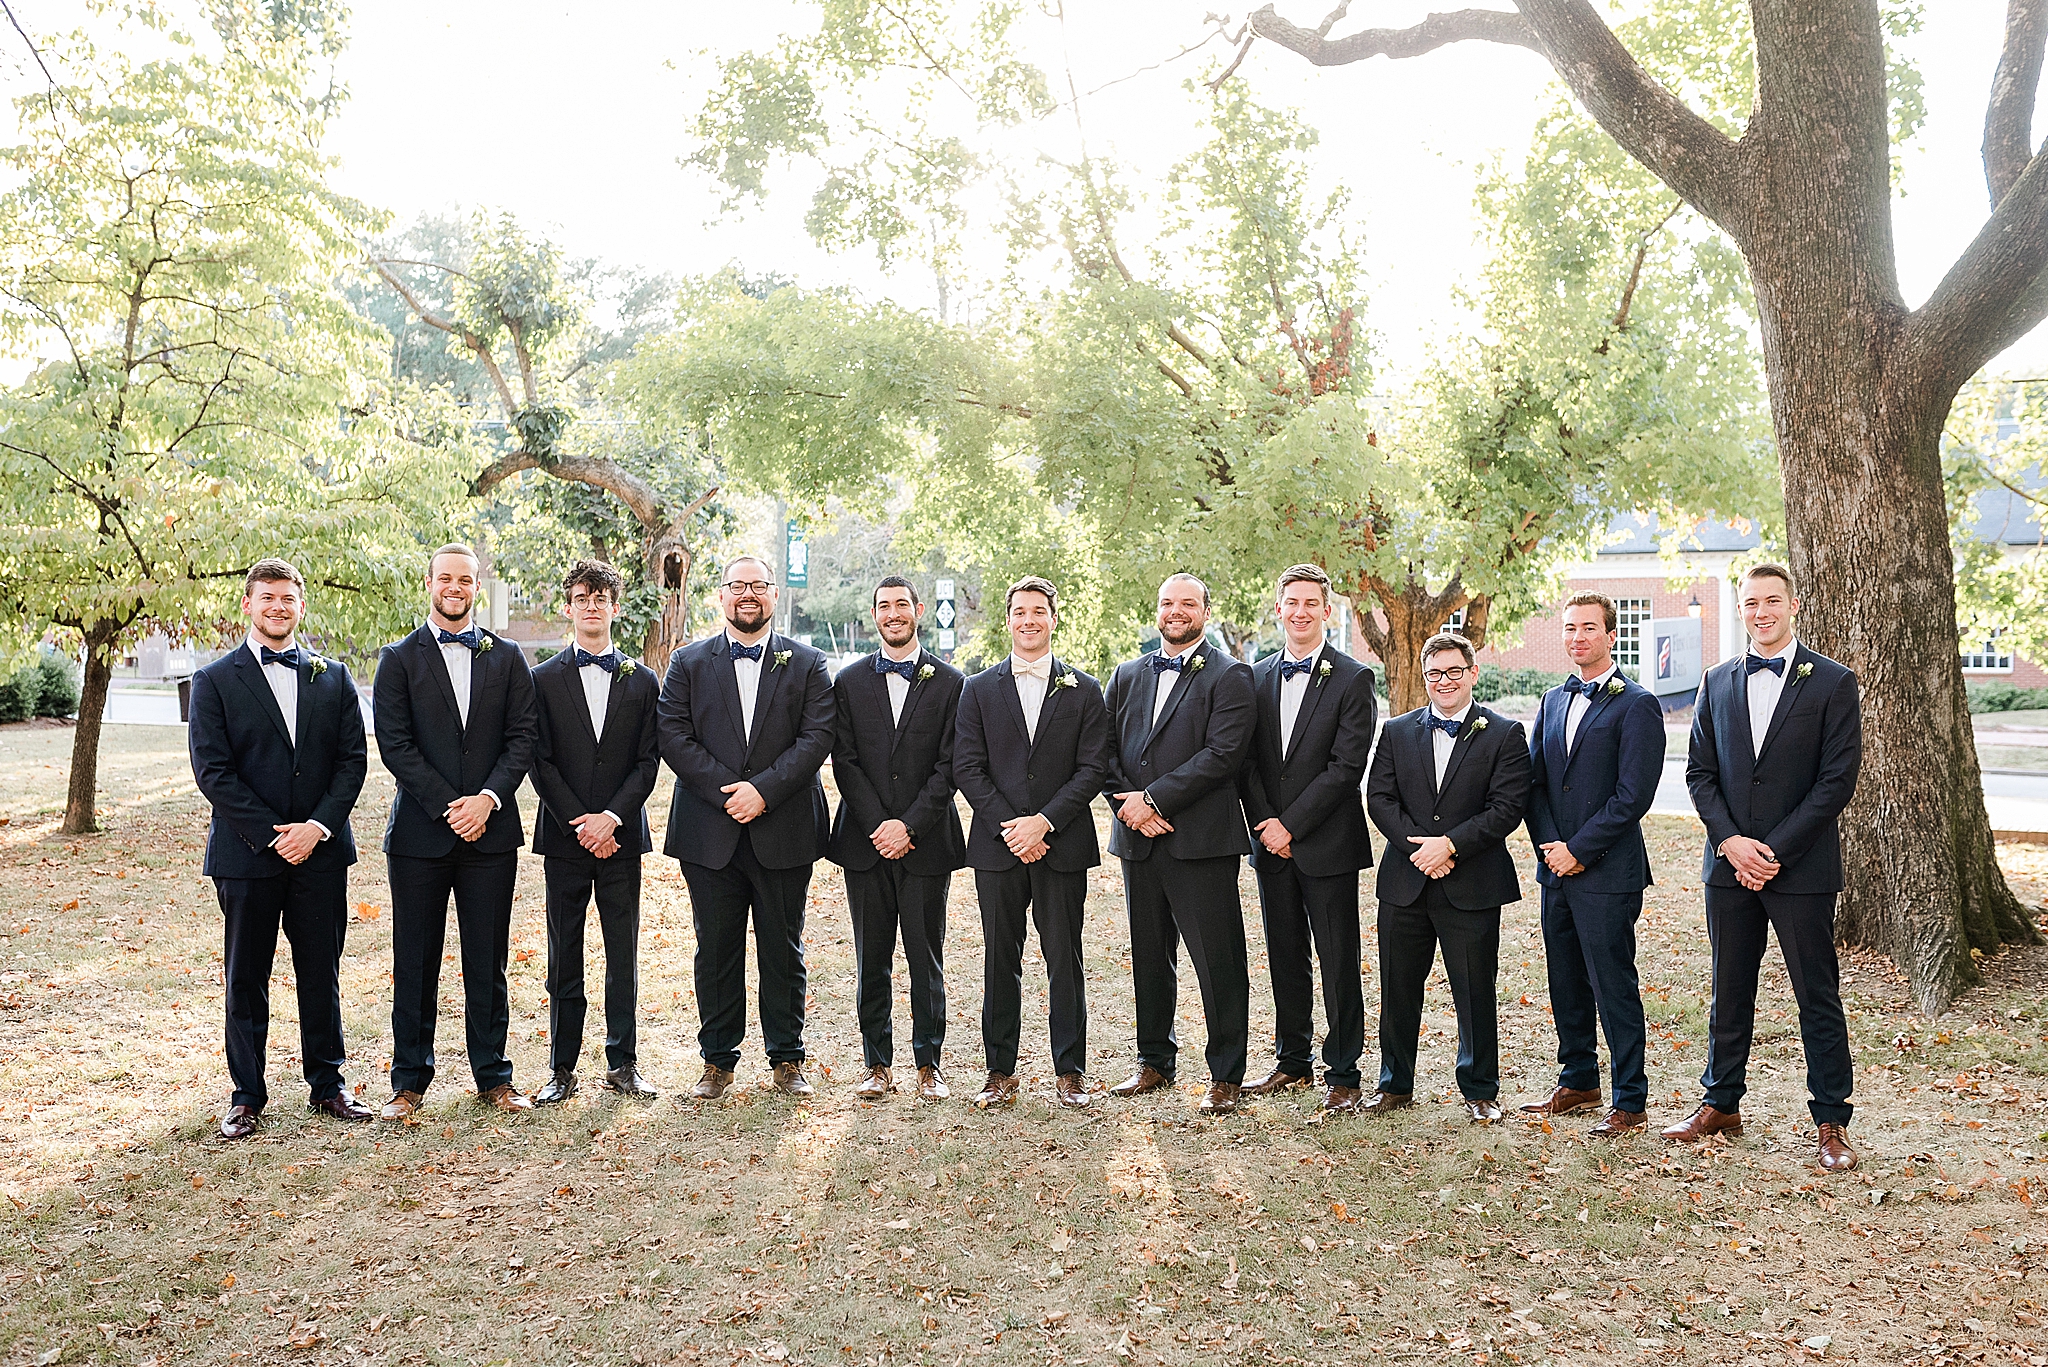 groomsmen in navy suits before classic Southern wedding